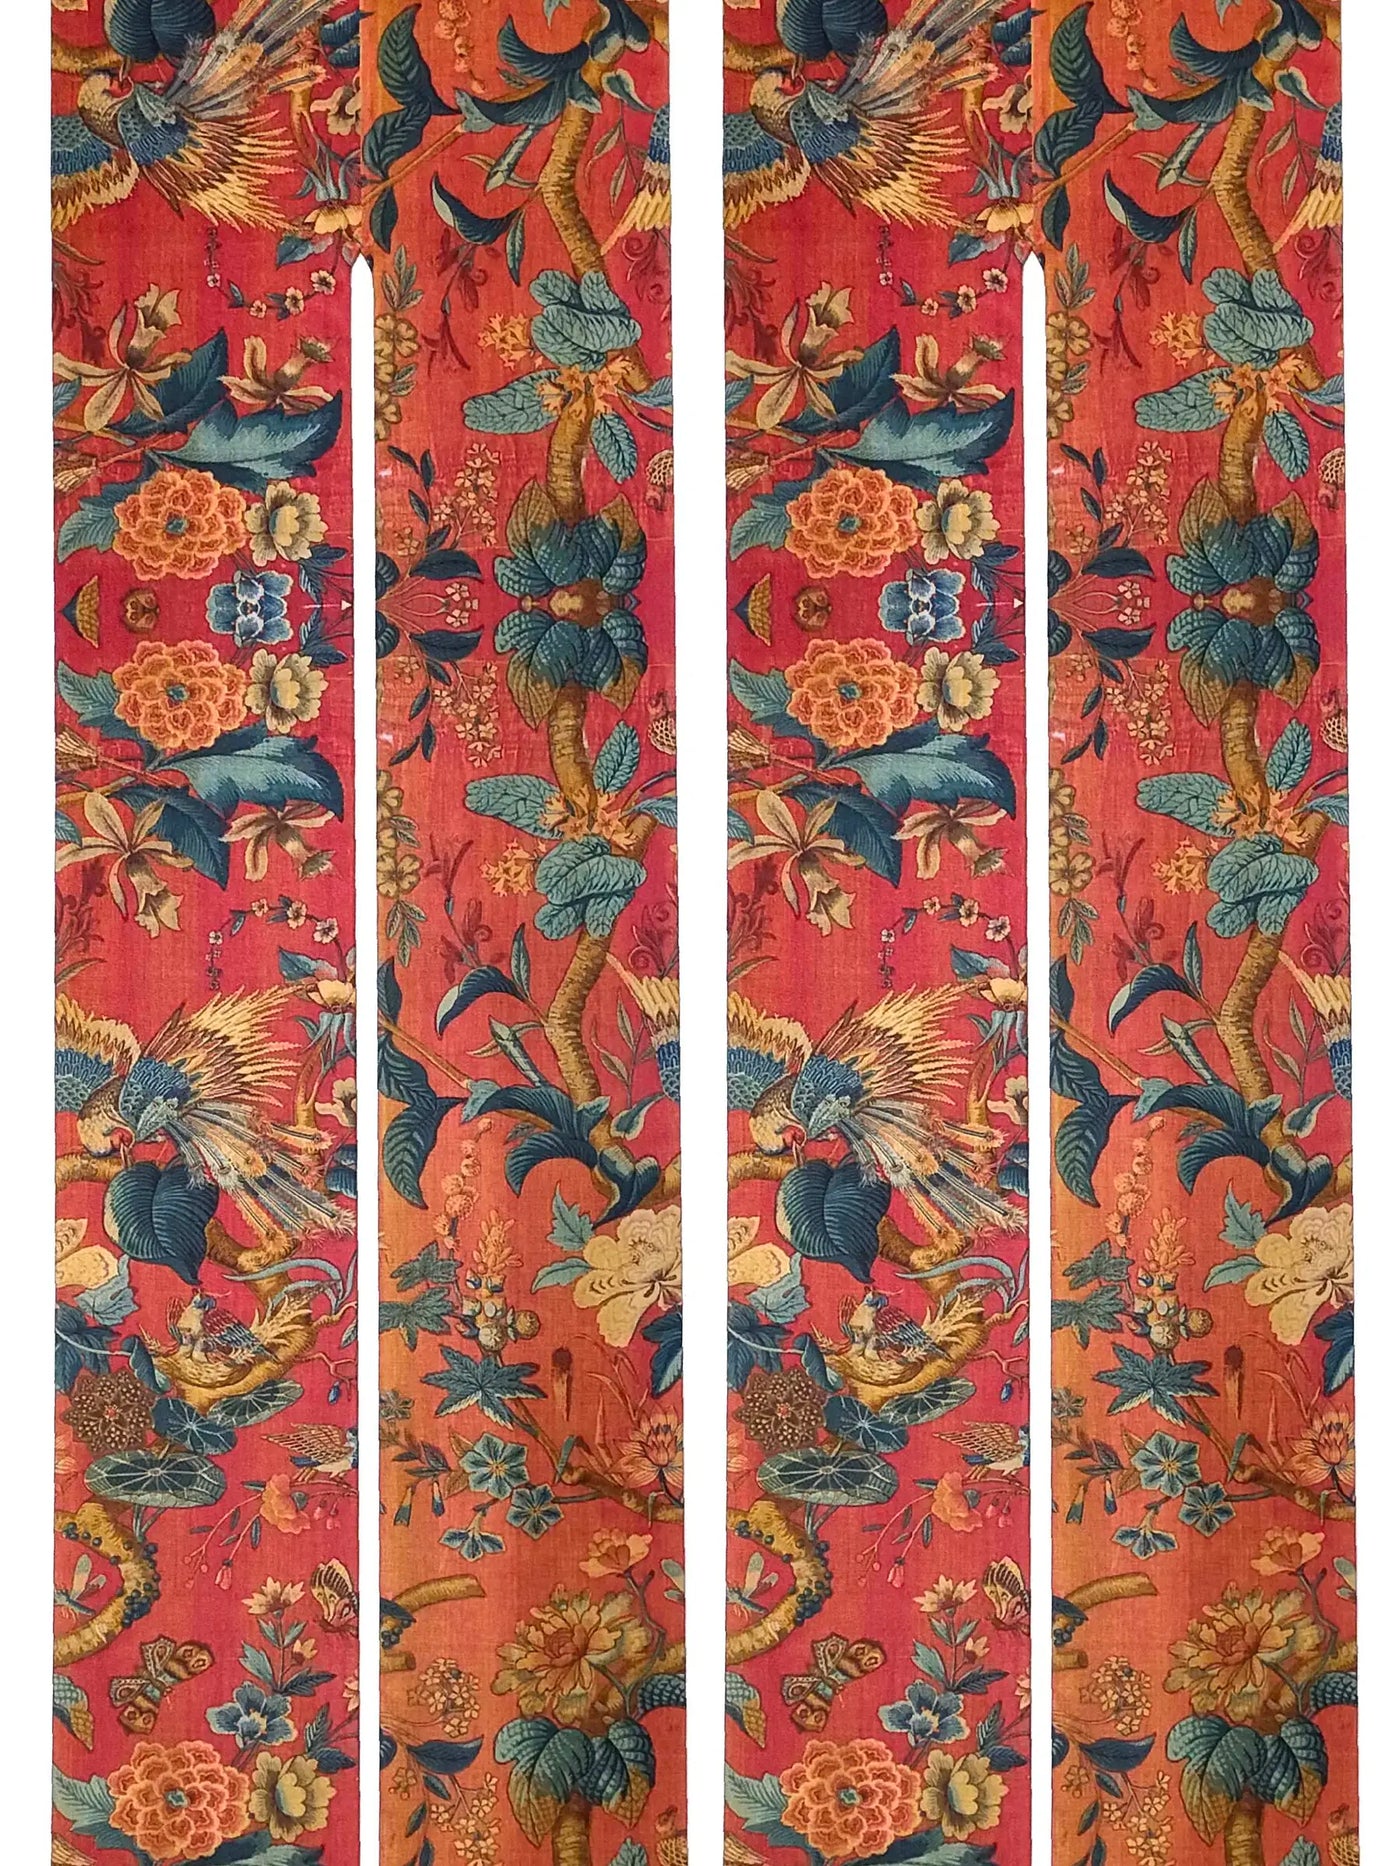 Flower Bird England Panel I | The Art Institute of Chicago | Printed Tights